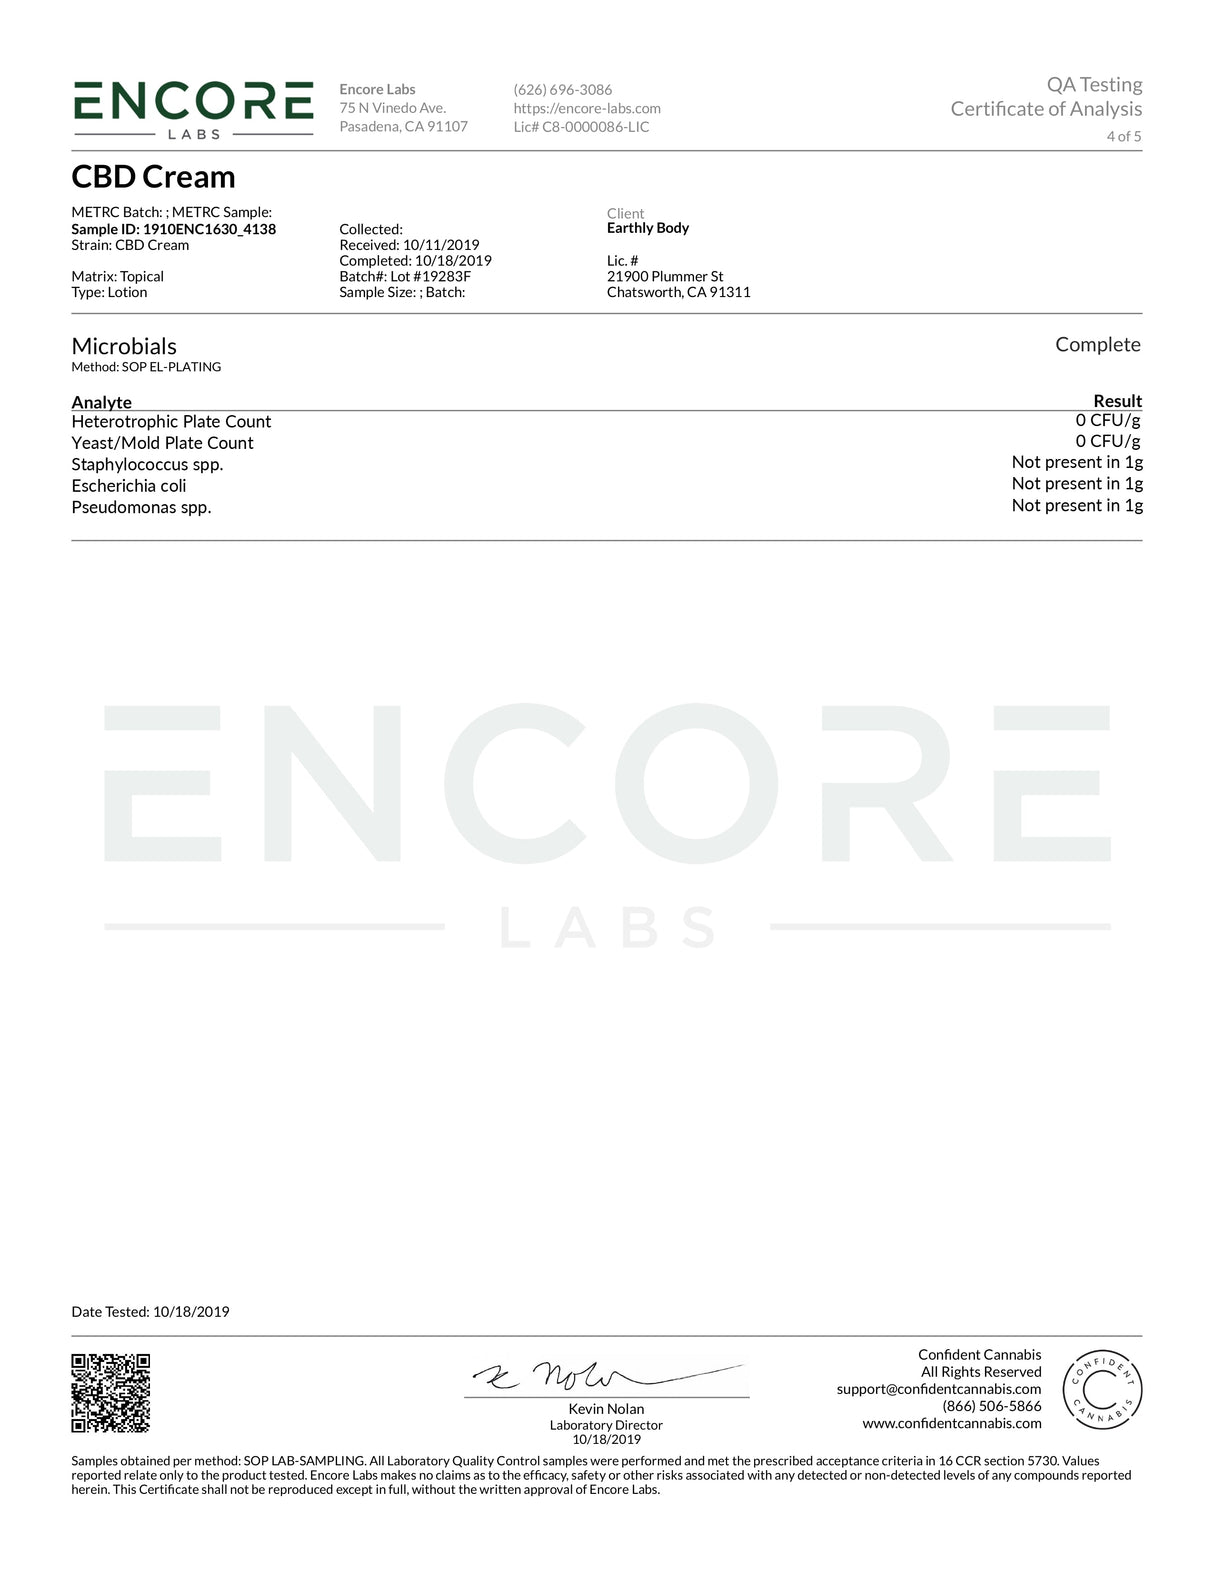 Encore Labs certificate of analysis for Earthly Body CBD Daily Intensive Cream